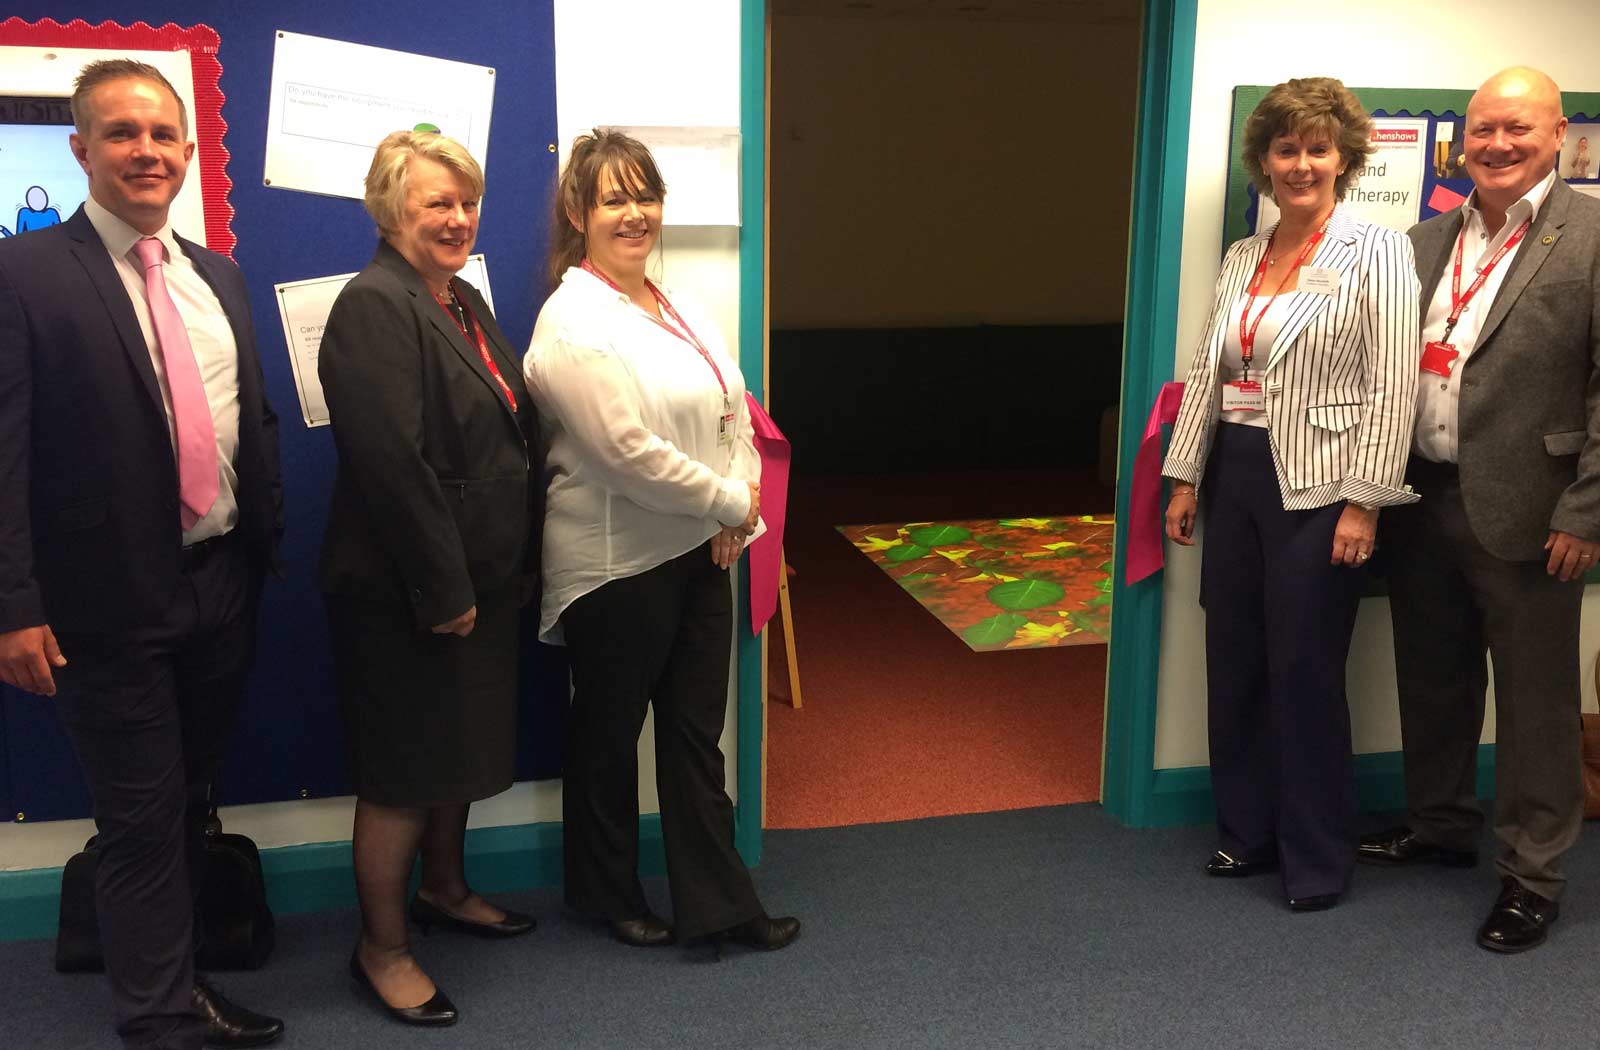 Cutting the ribbon to open the new sensory room at Henshaws Specialist College. Left to right: Chris Brewis (4Life Wealth Management), Sue McGregor, (4Life Wealth Management), Angela North (Henshaws Specialist College Principal), Elaine Hinchliffe (St James’s Place Foundation) and Andy Hinchliffe (St James’s Place Foundation)